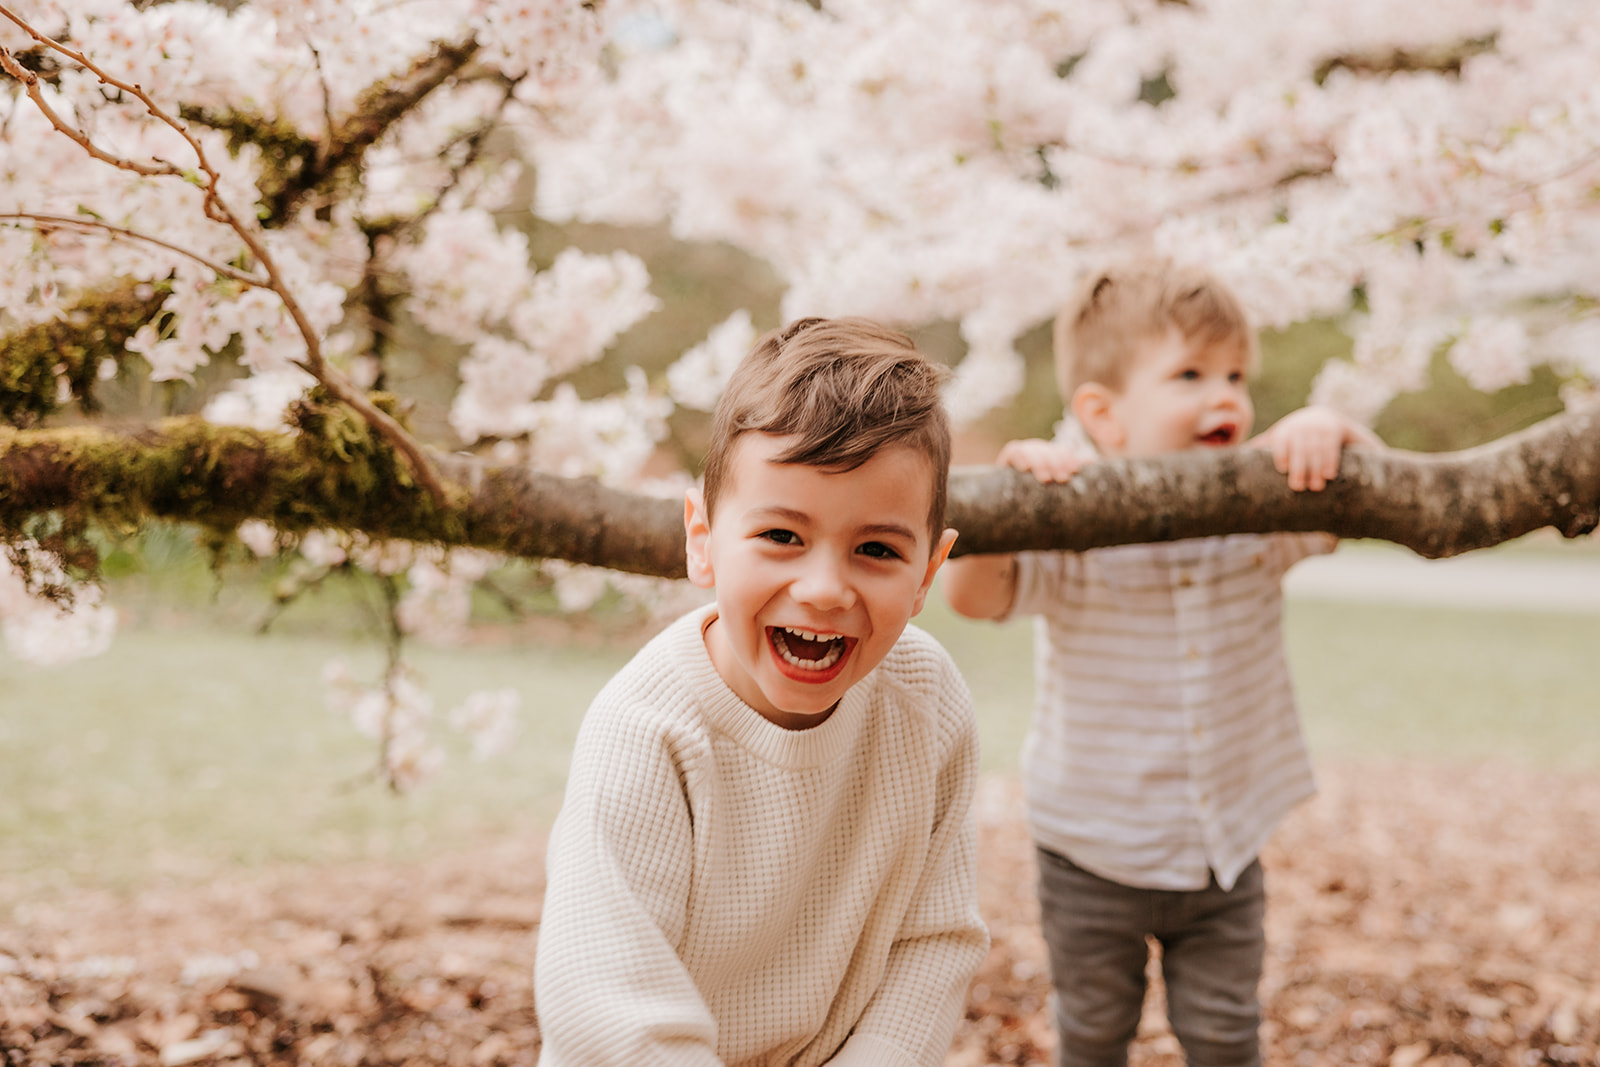 A photograph of two young boys laughing together while playing under a cherry blossom tree. 